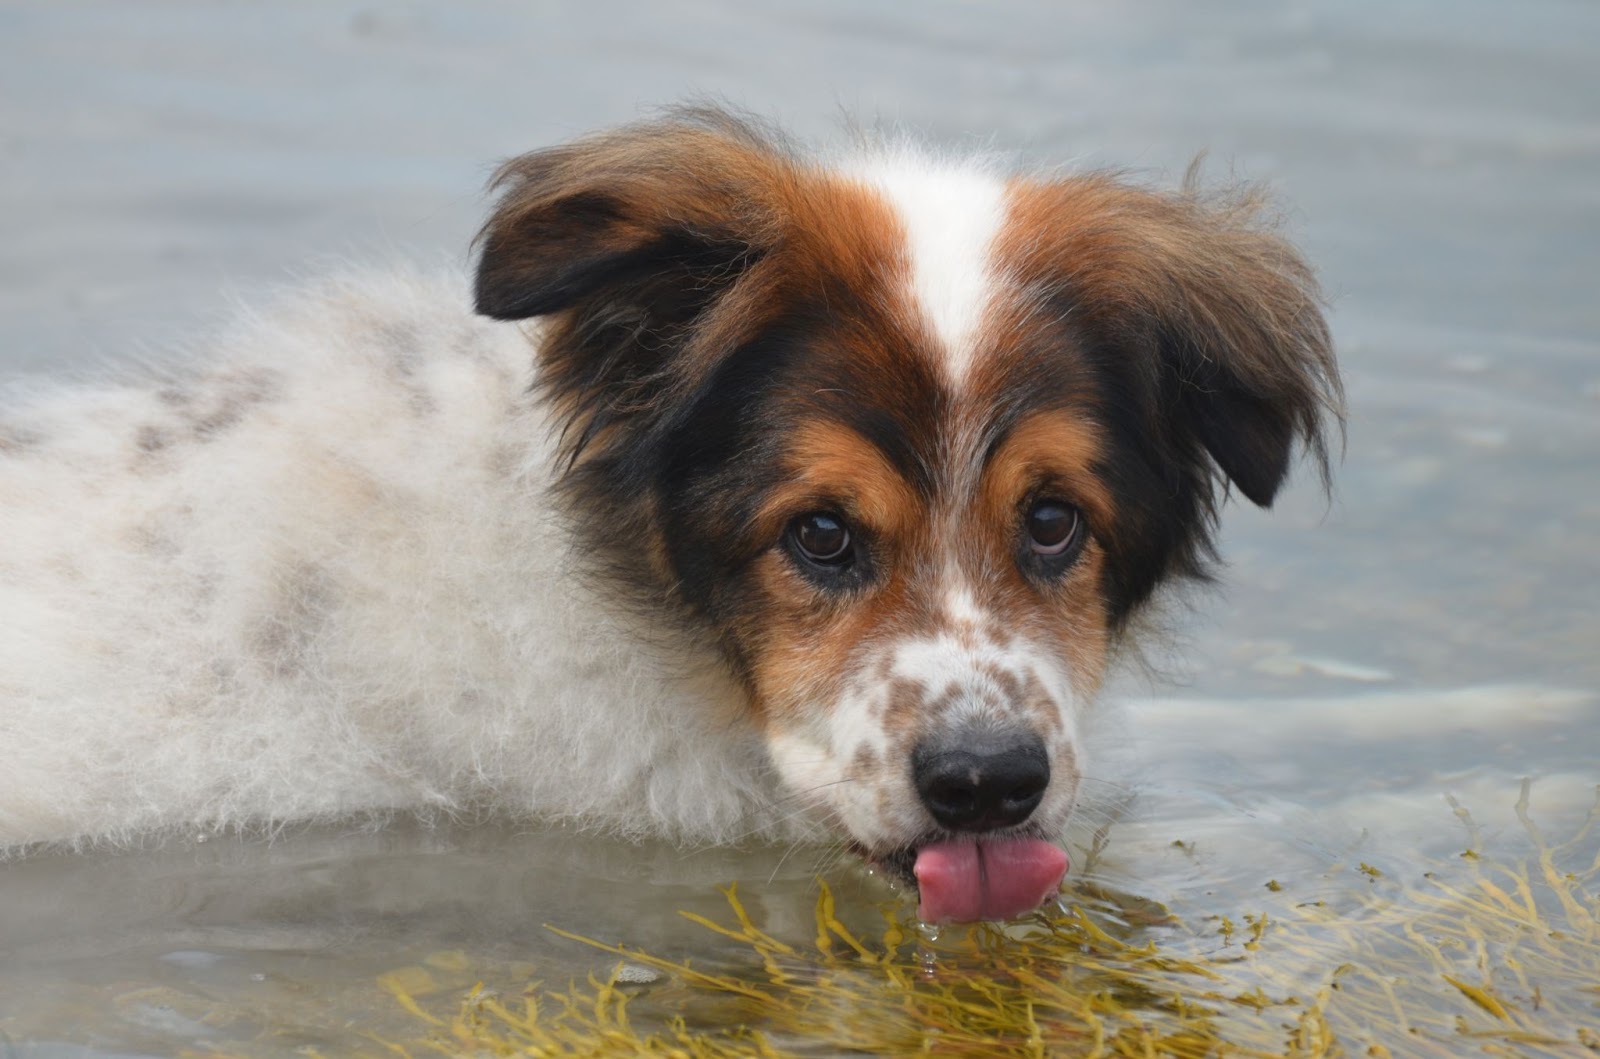 is kelp good for dogs